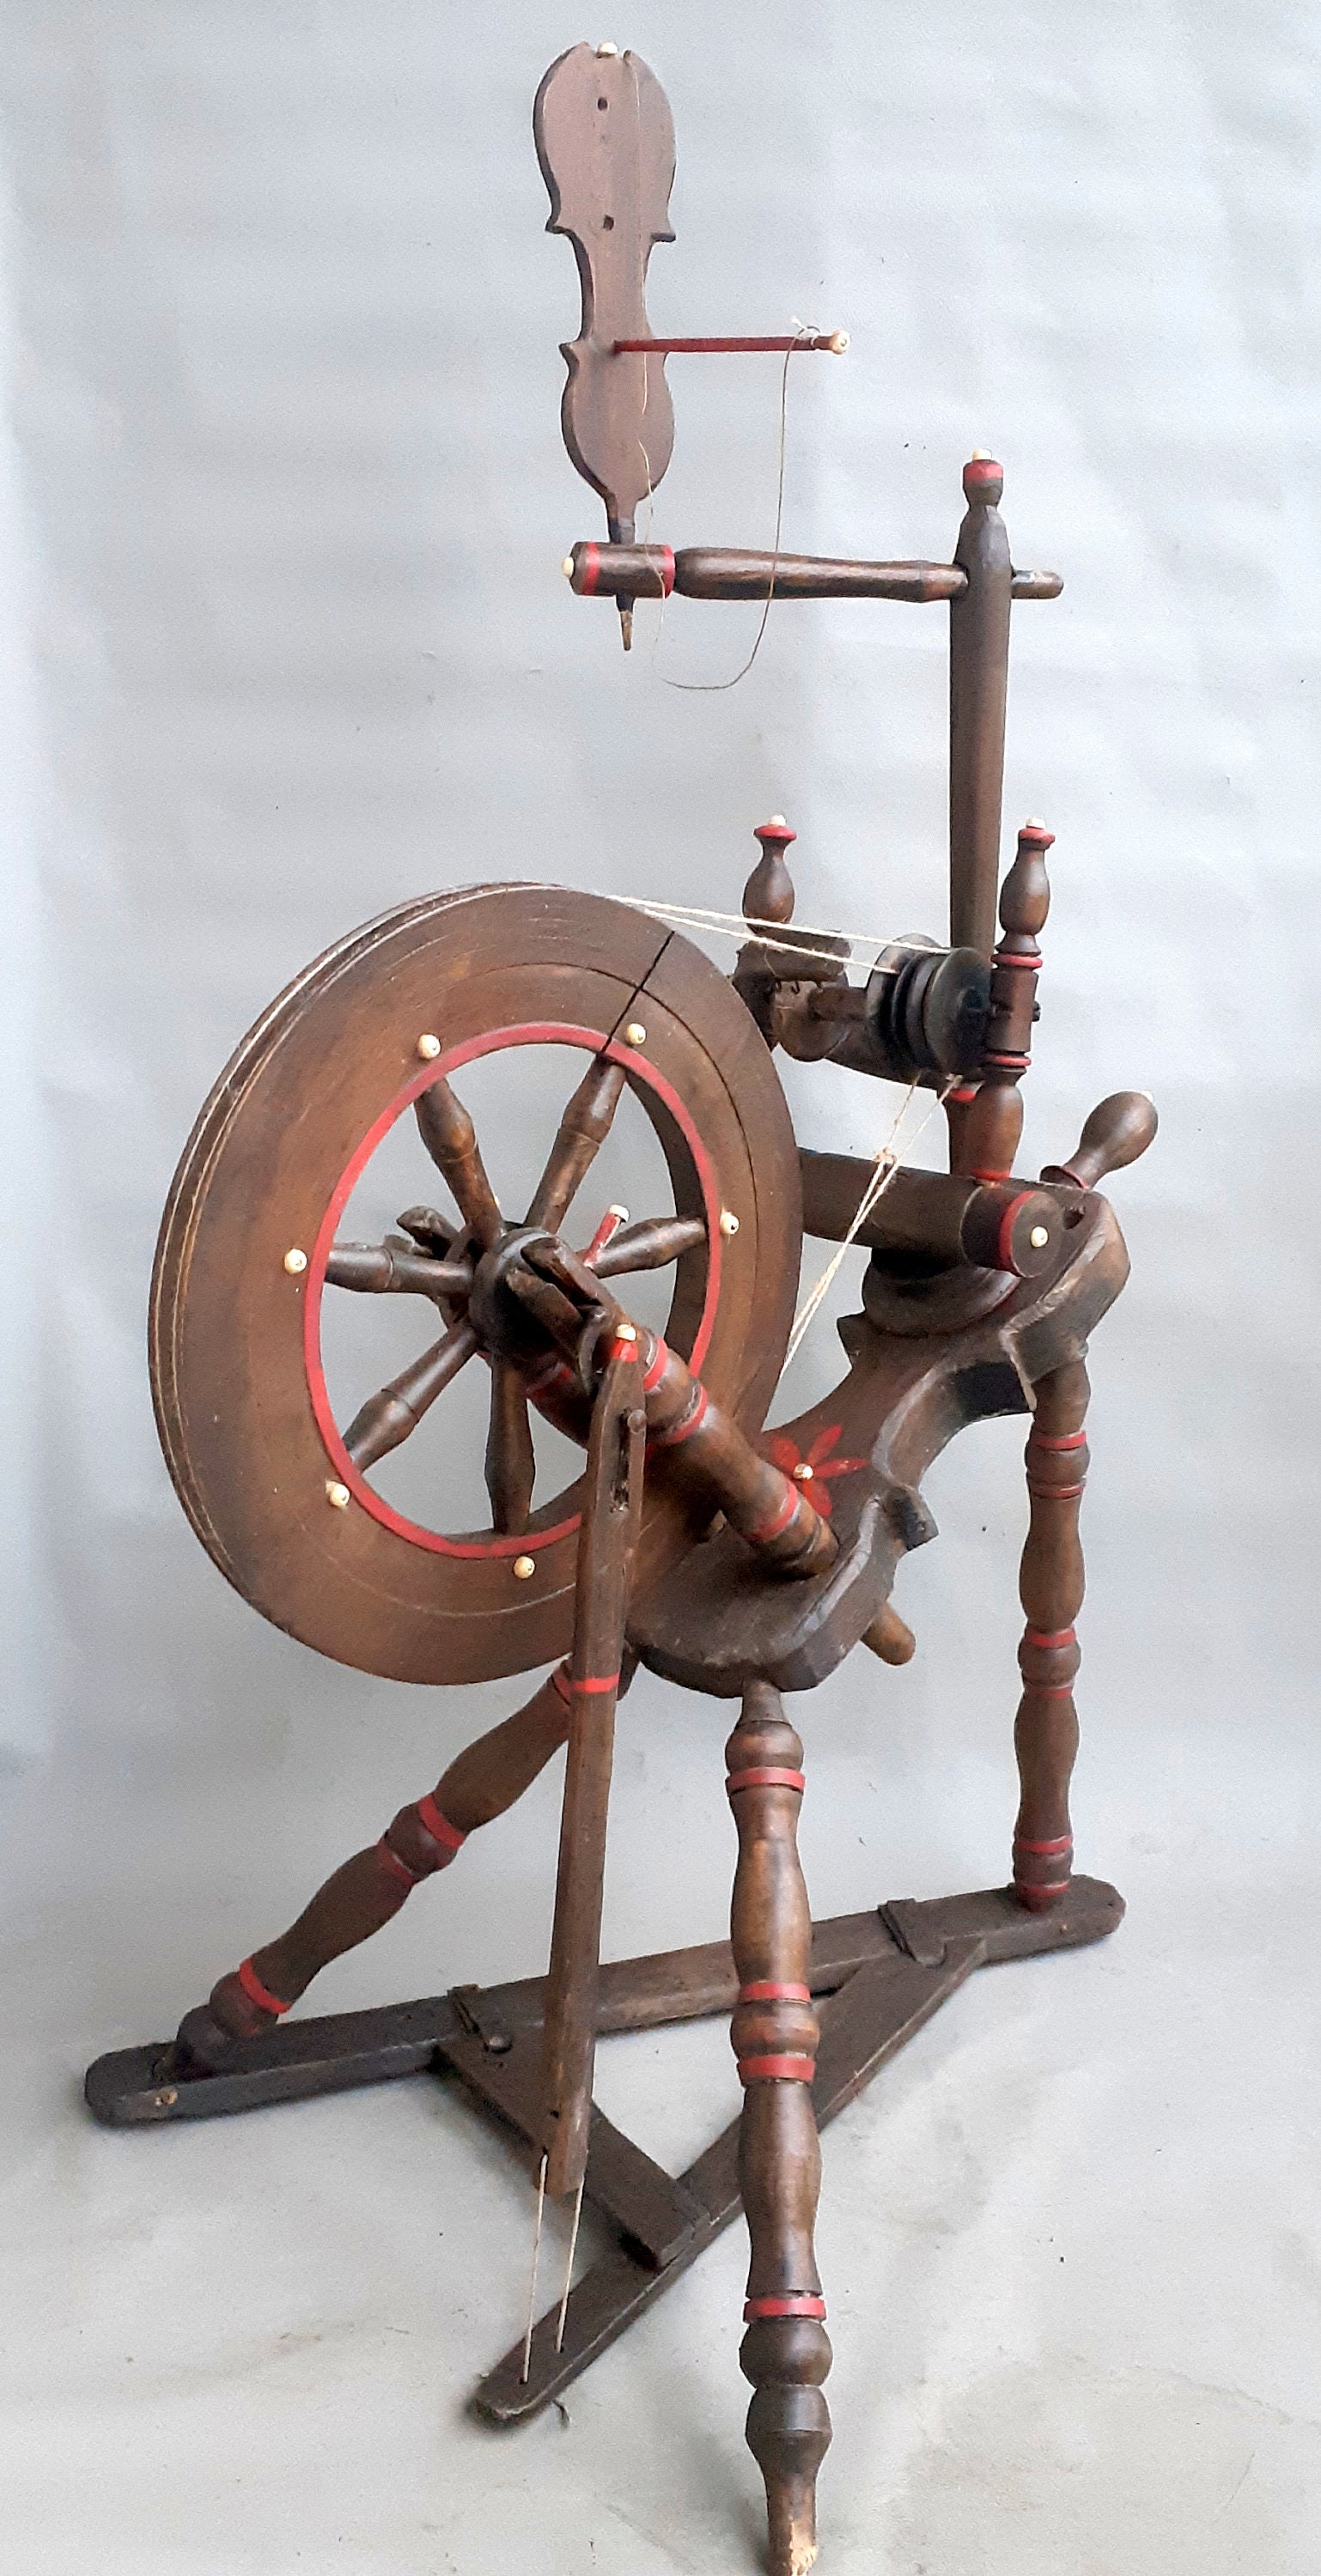 How a Spinning Wheel Works